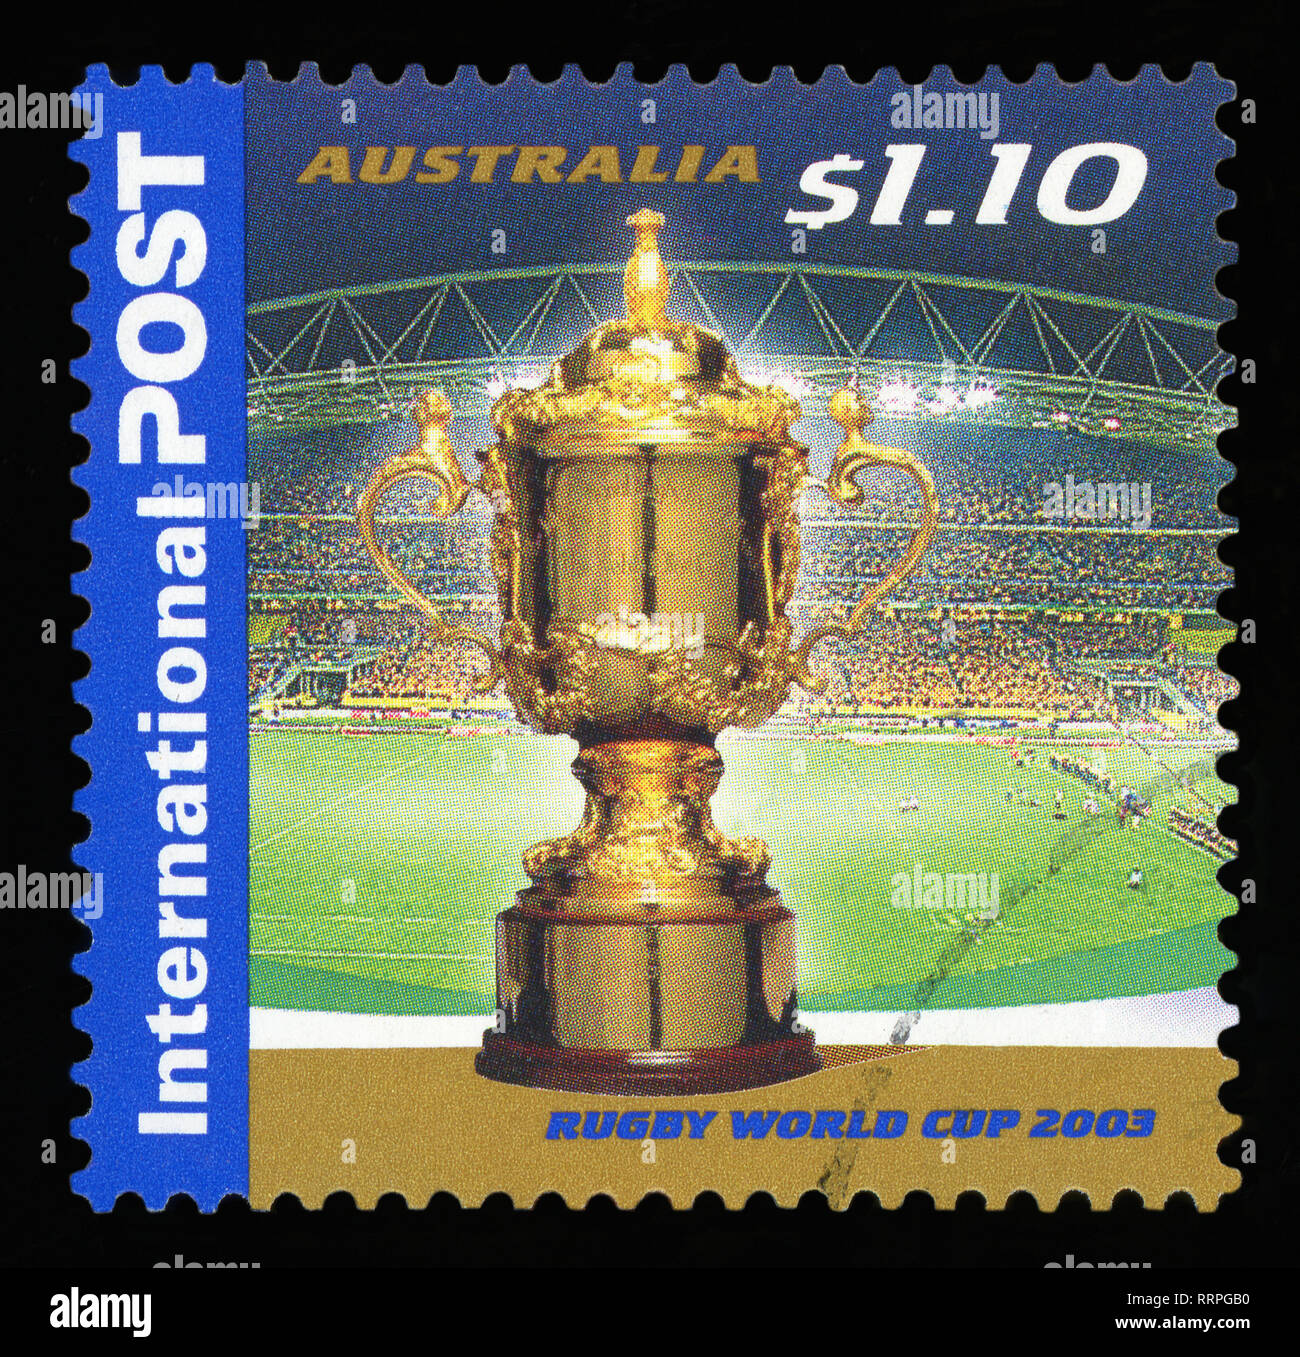 AUSTRALIA - CIRCA 2003: A Stamp printed in AUSTRALIA shows the Rugby World Cup 2003, series, circa 2003. Stock Photo